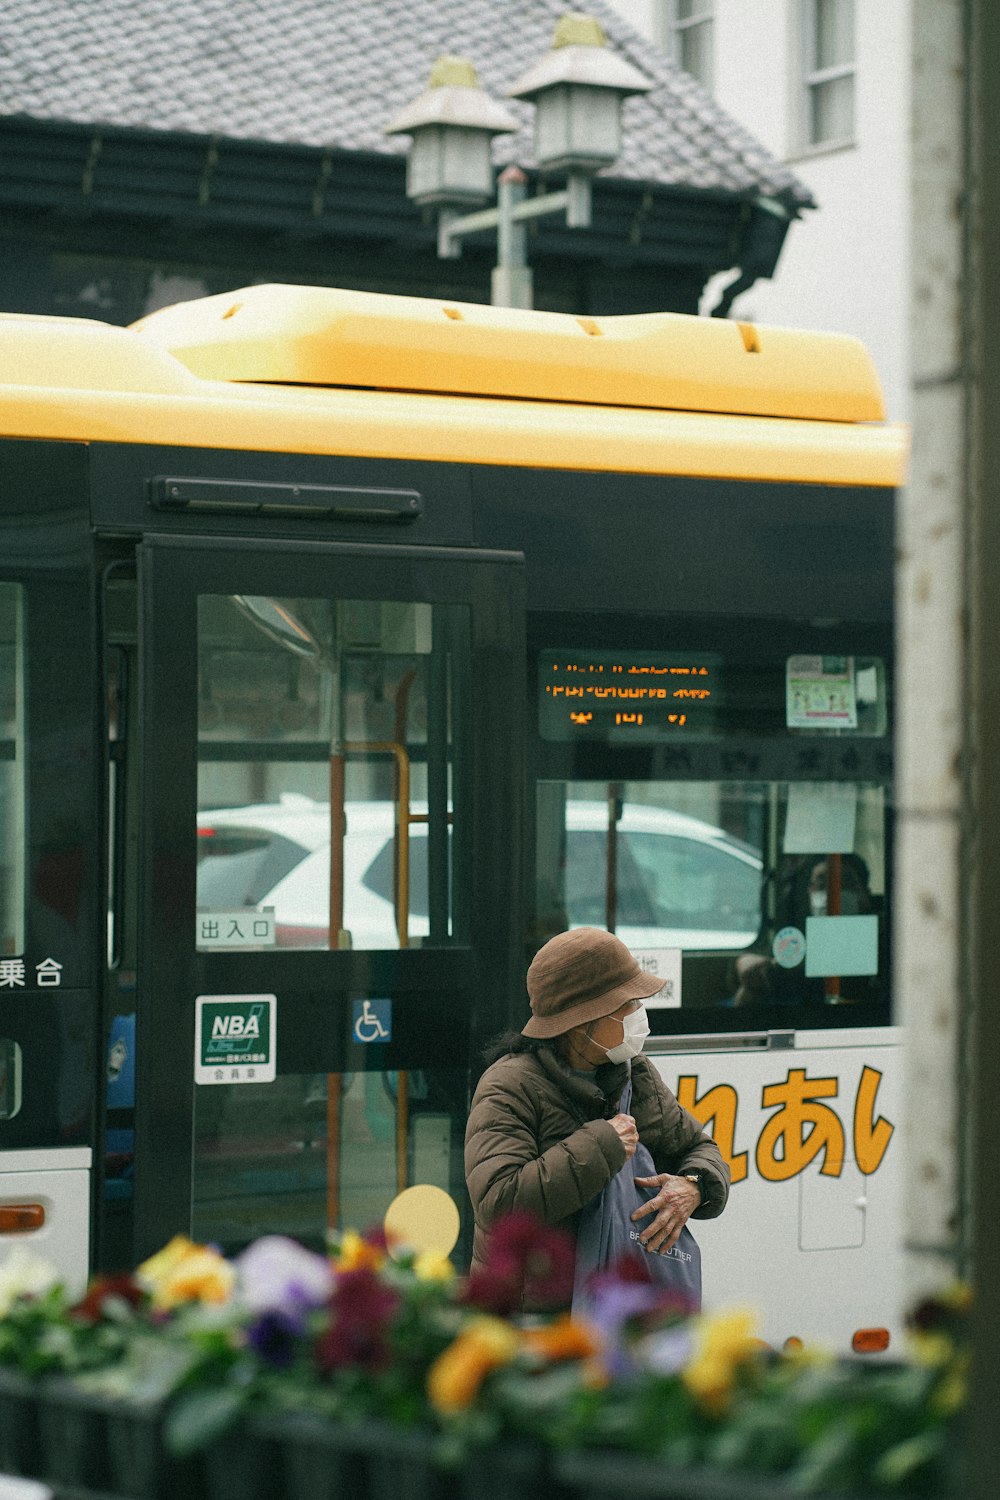 a woman standing in front of a bus